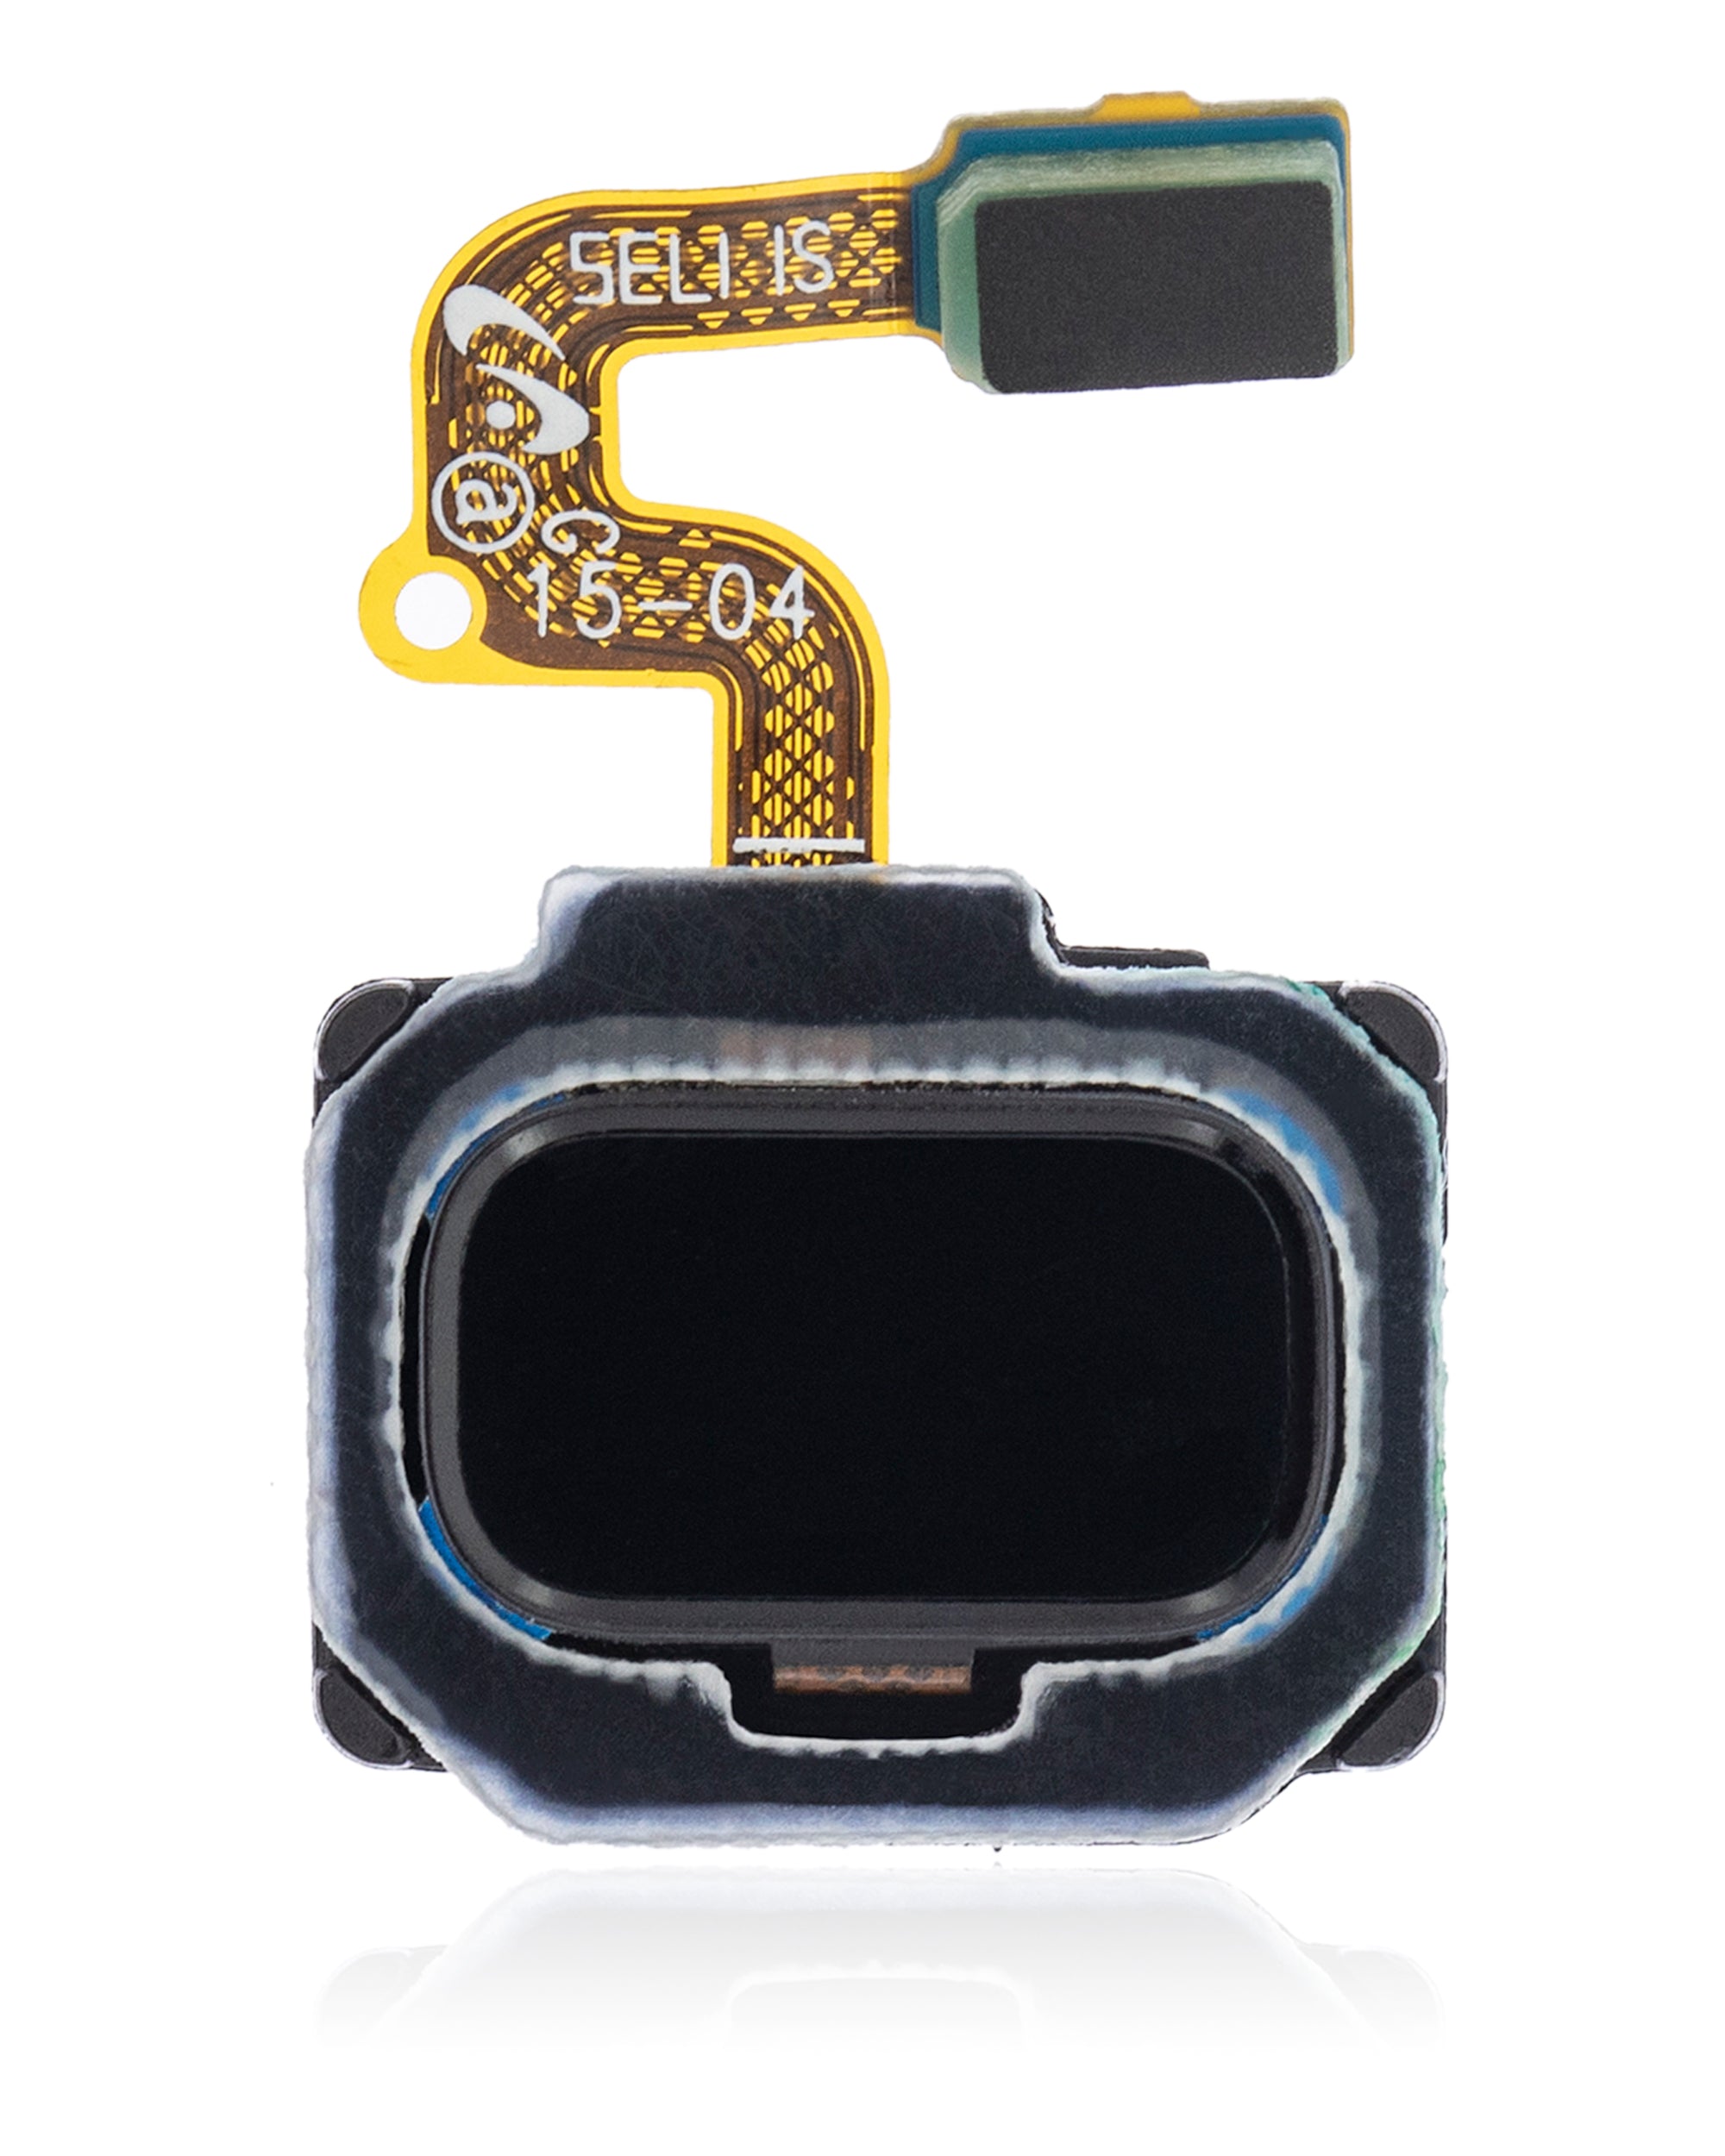 For Samsung Galaxy Note 8 Fingerprint Sensor With flex cable Replacement (All Colors)